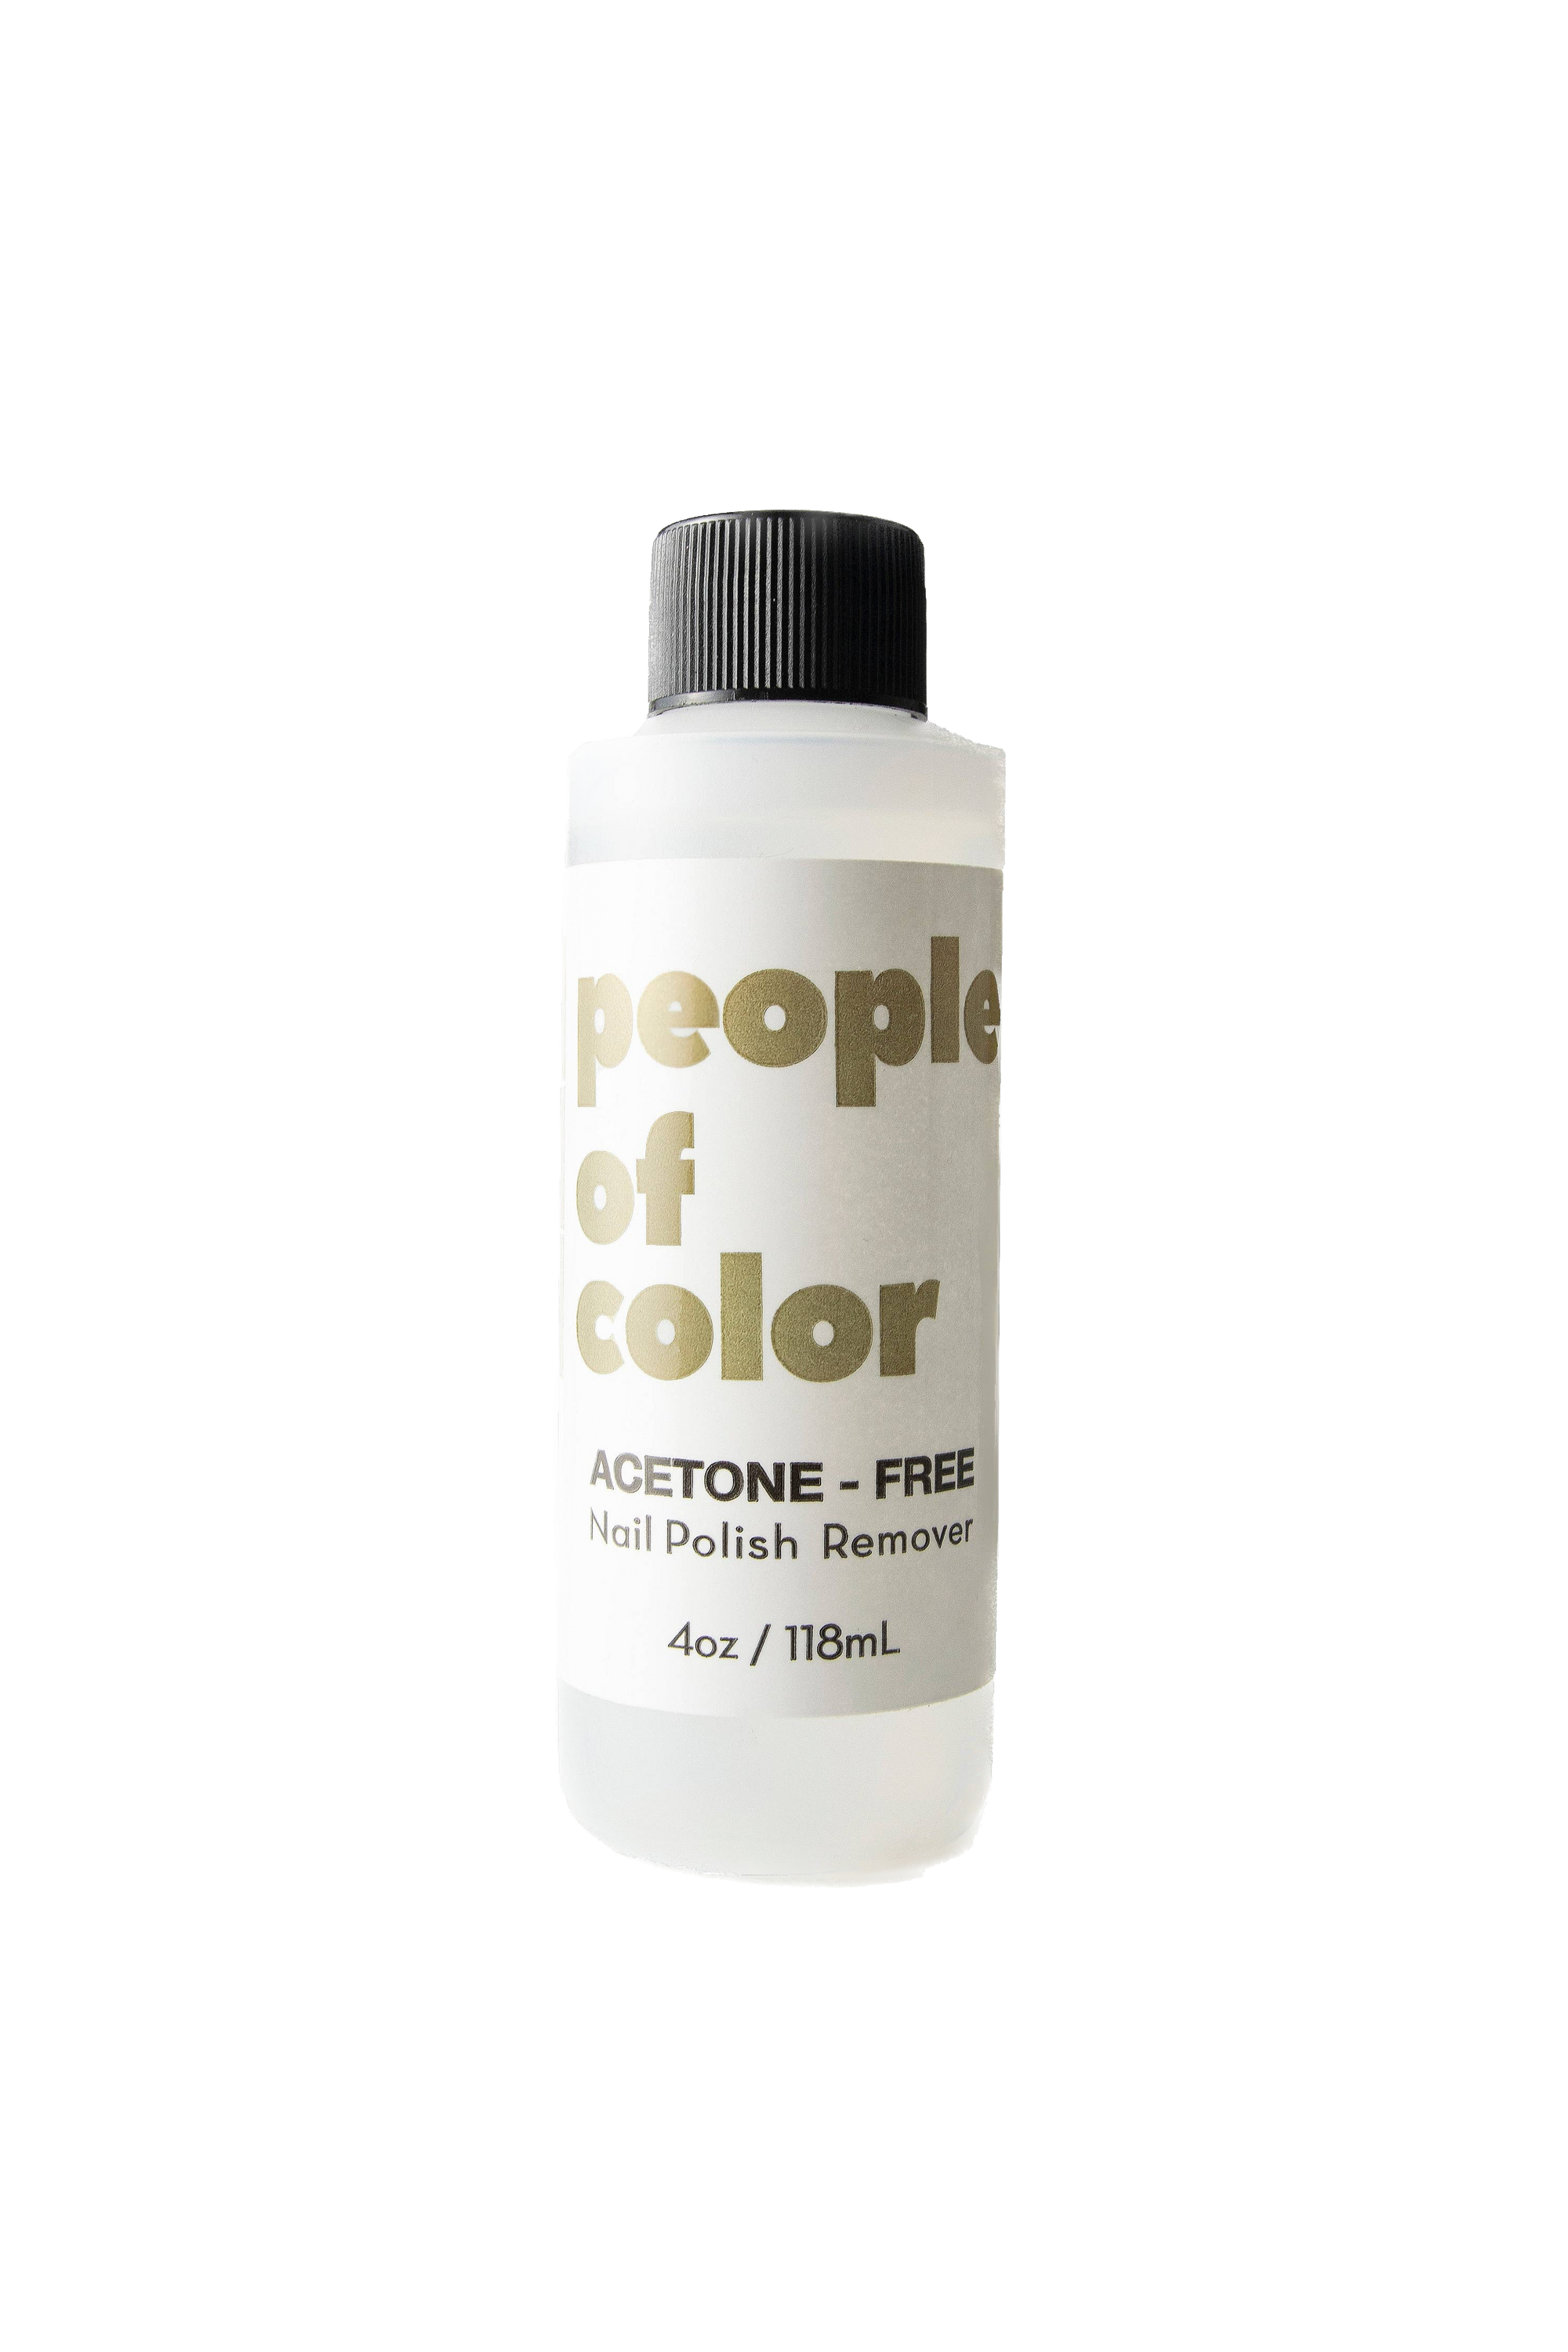 People of Color Acetone-Free Nail Polish Remover